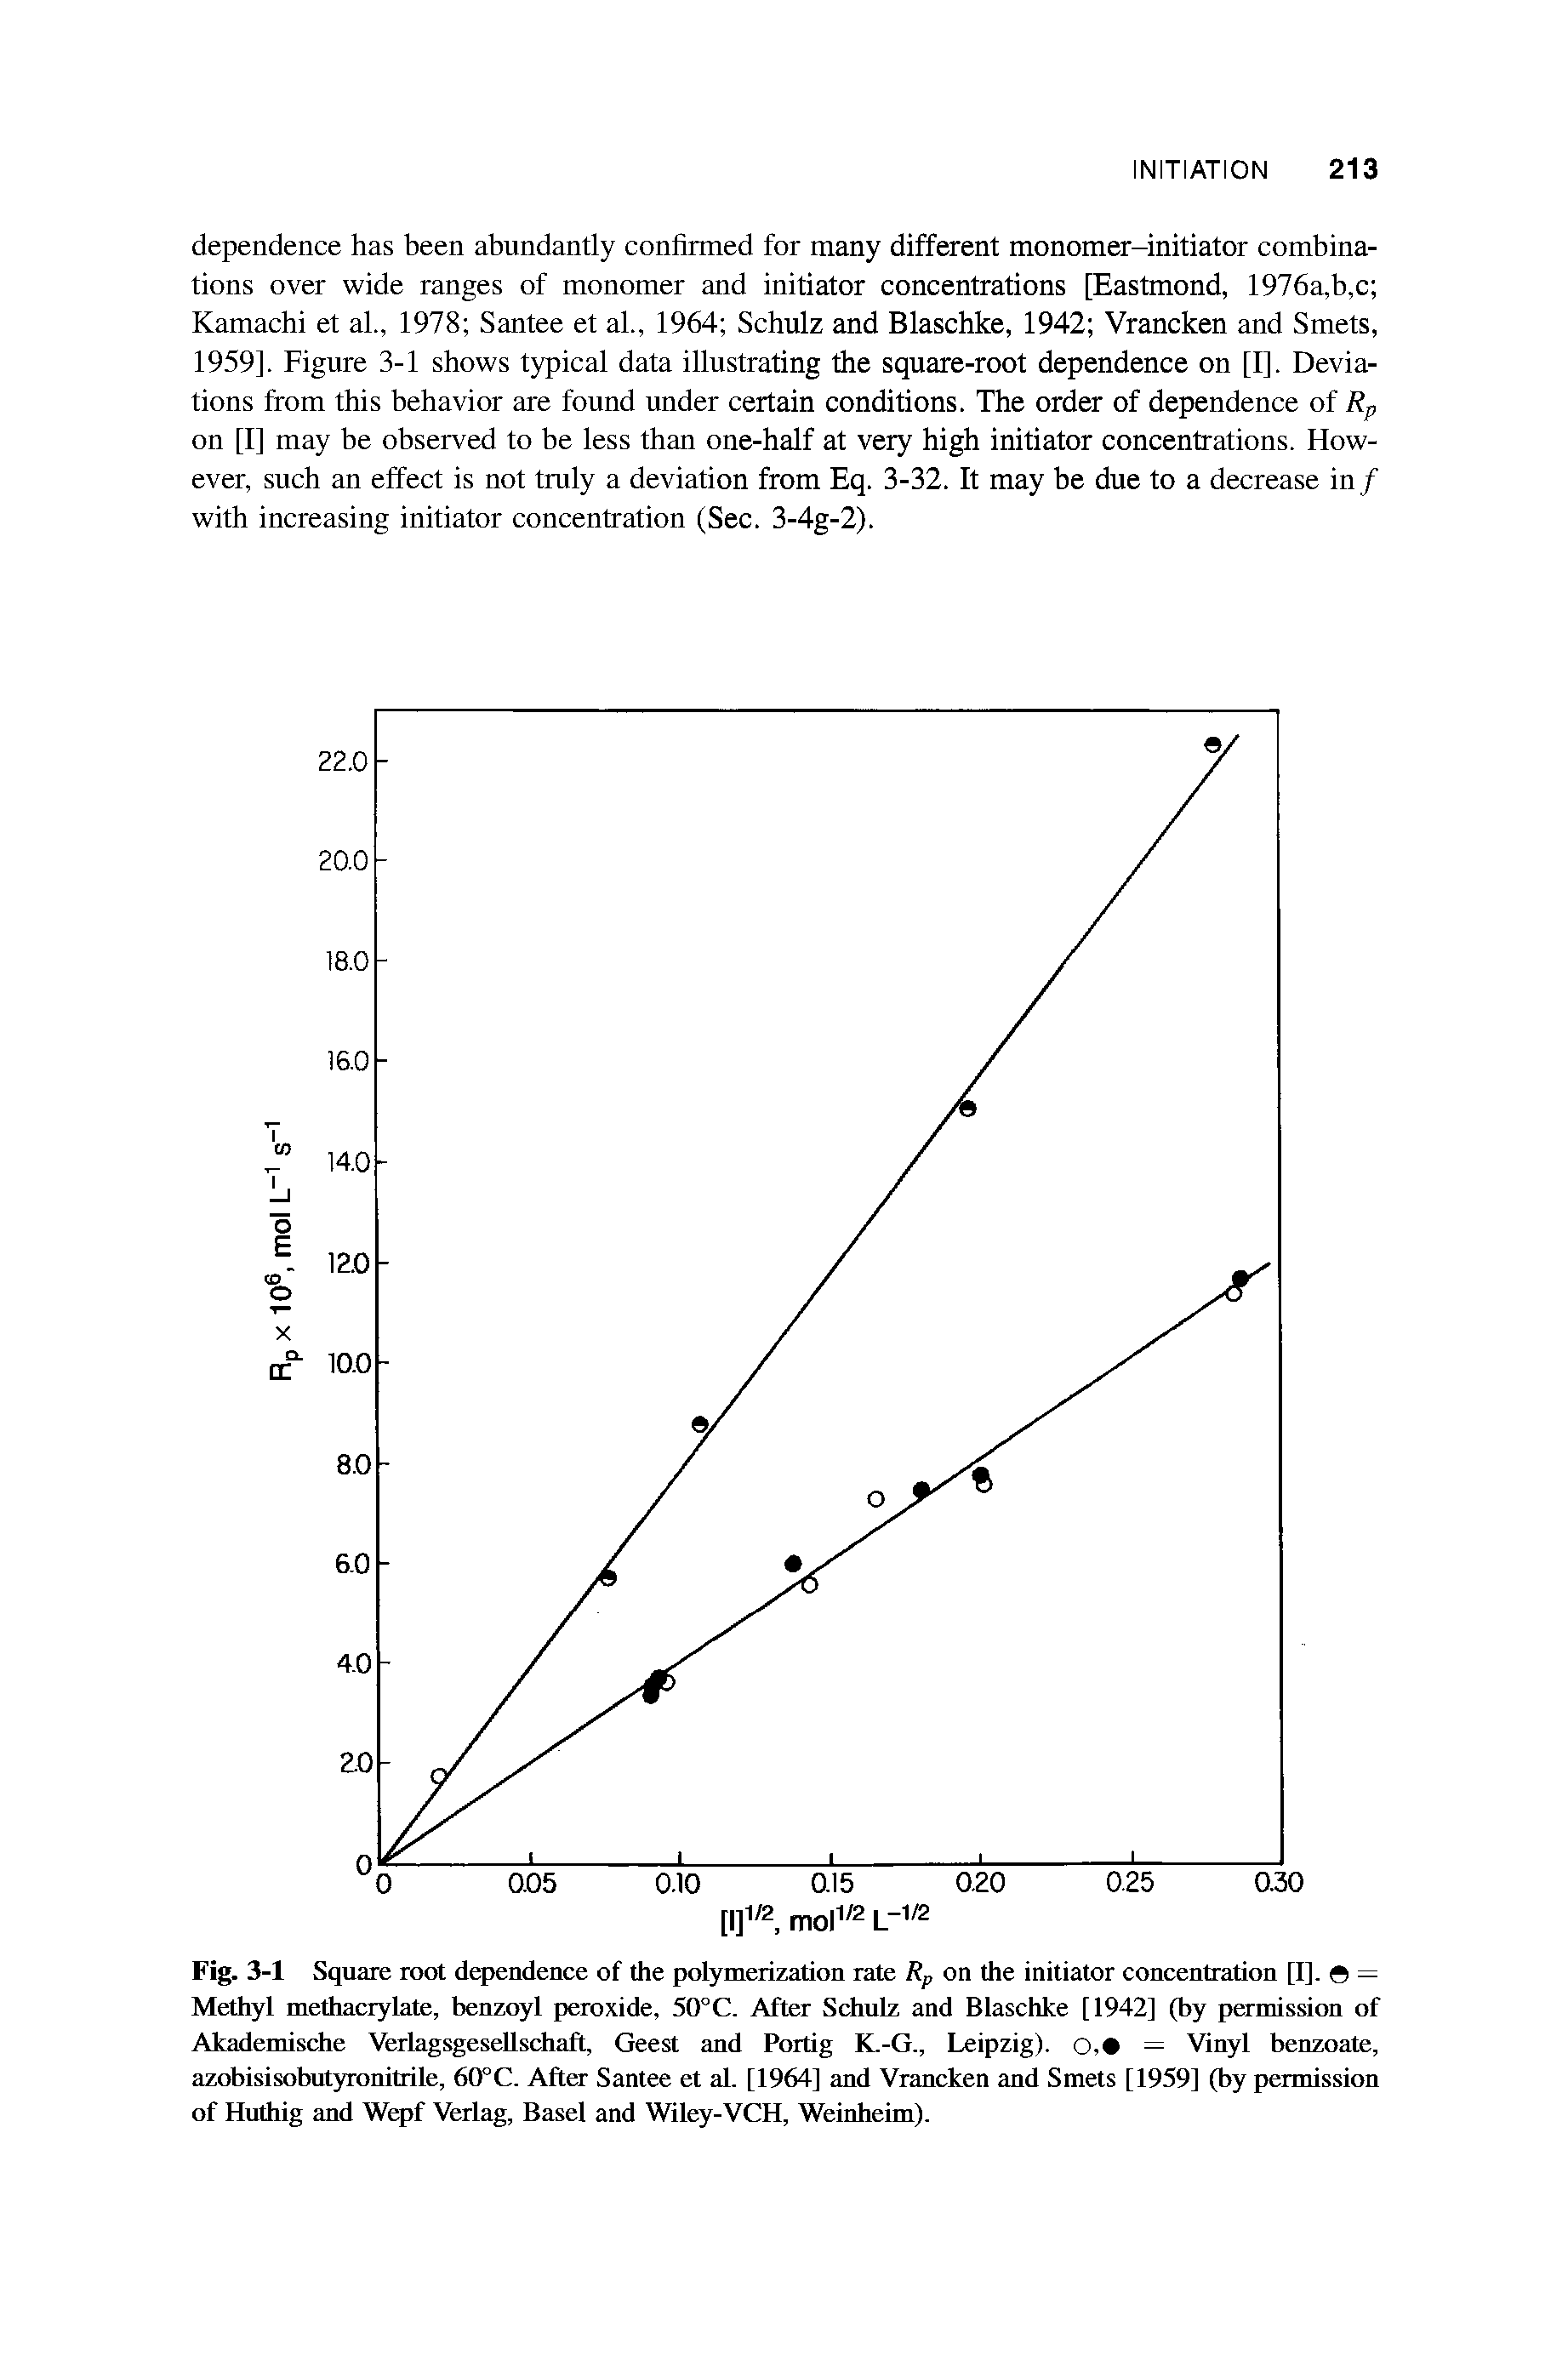 Fig. 3-1 Square root dependence of the polymerization rate Rp on the initiator concentration [I], — Methyl methacrylate, benzoyl peroxide, 50°C. After Schulz and Blaschke [1942] (by permission of Akademische Verlagsgesellschaft, Geest and Portig K.-G., Leipzig), o, — Vinyl benzoate, azobisisobutyronitrile, 60°C. After Santee et al. [1964] and Vrancken and Smets [1959] (by permission of Huthig and Wepf Verlag, Basel and Wiley-VCH, Weinheim).